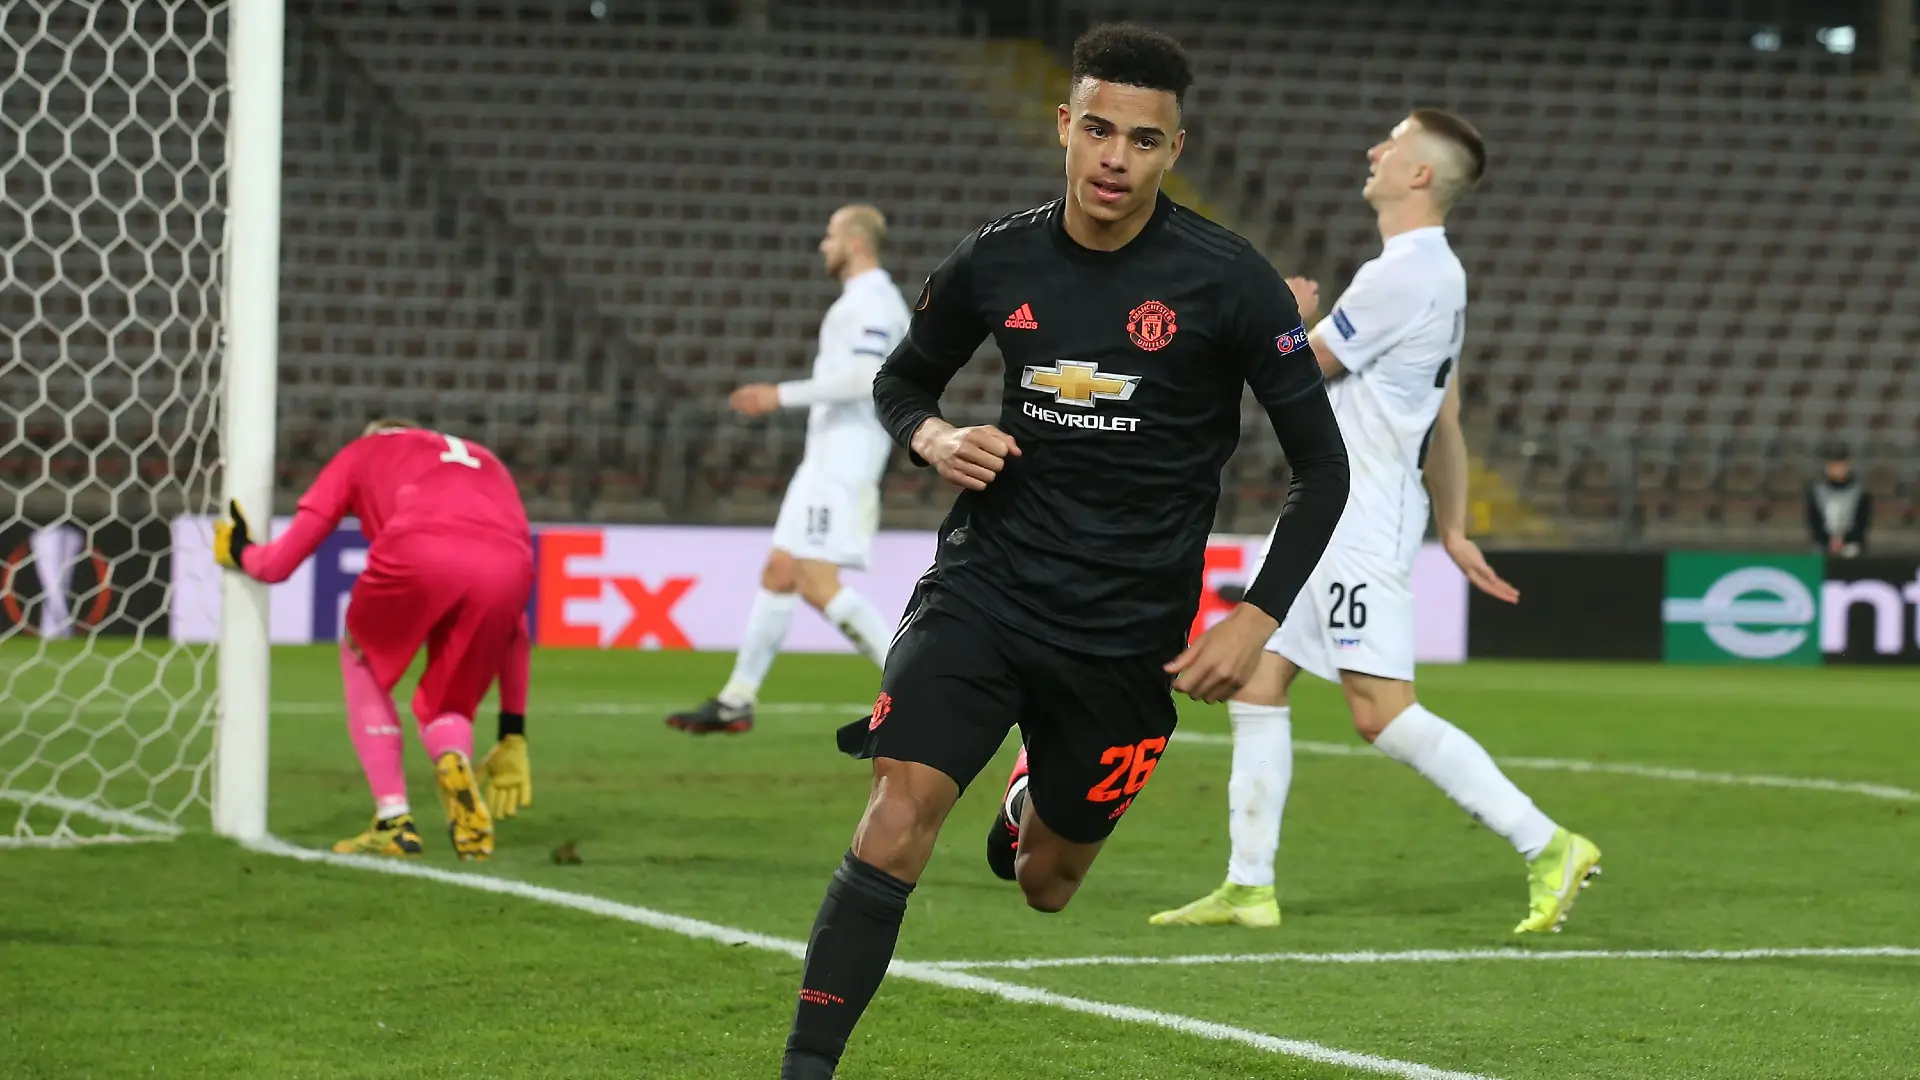 Will Mason Greenwood play for Manchester United?